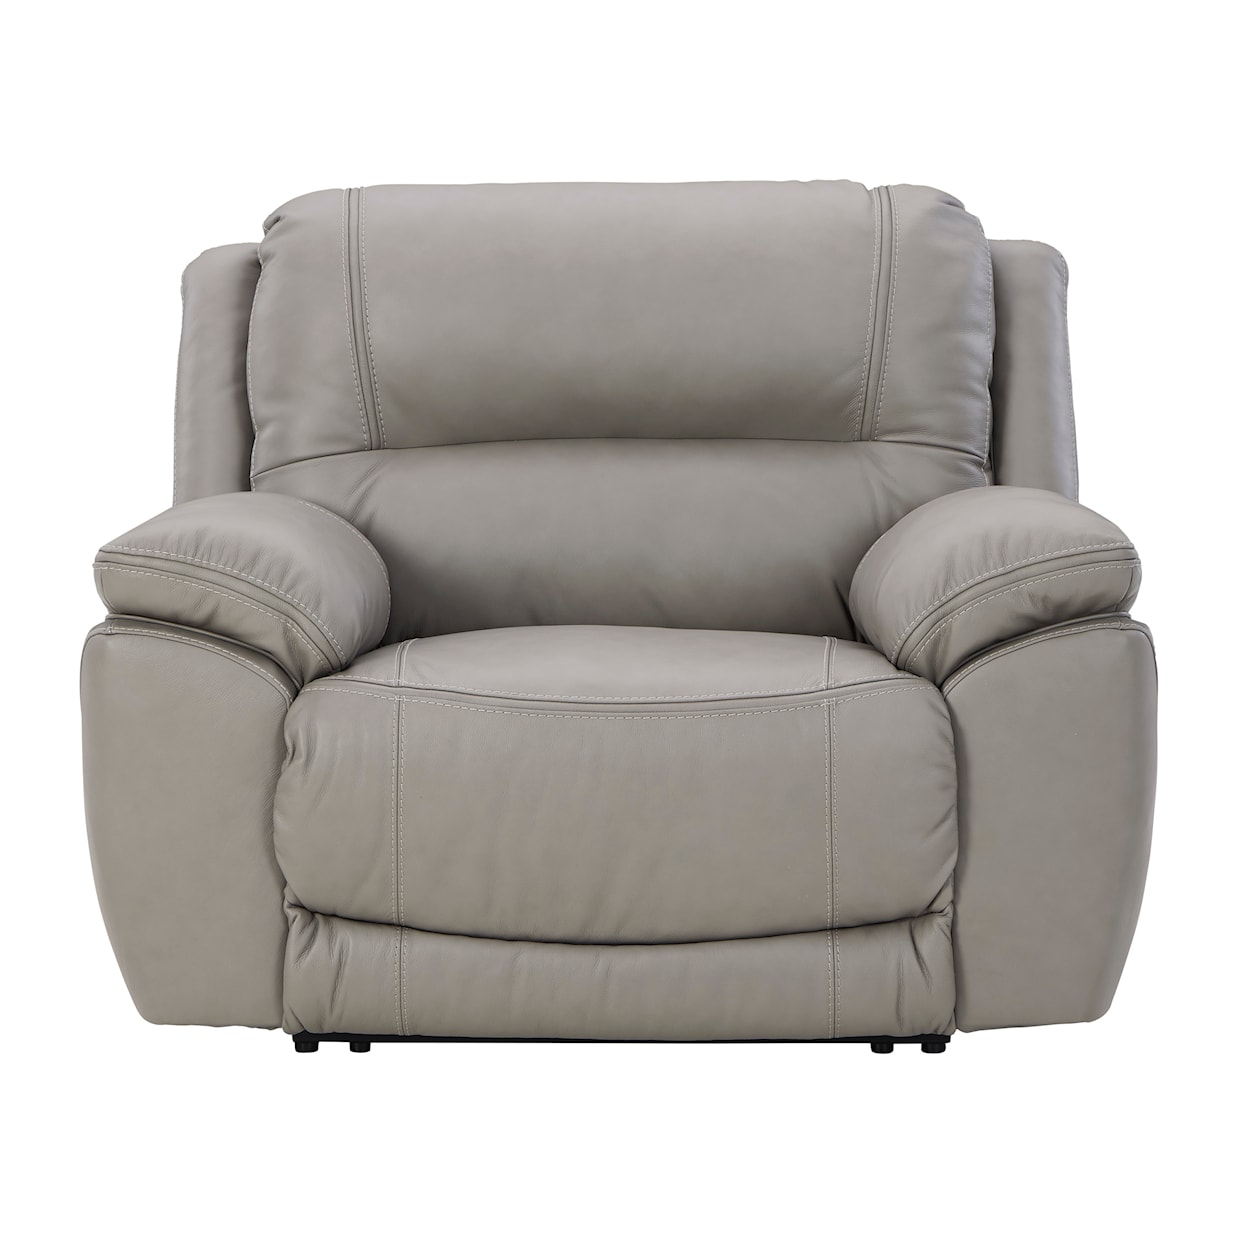 Signature Design by Ashley Dunleith Power Recliner